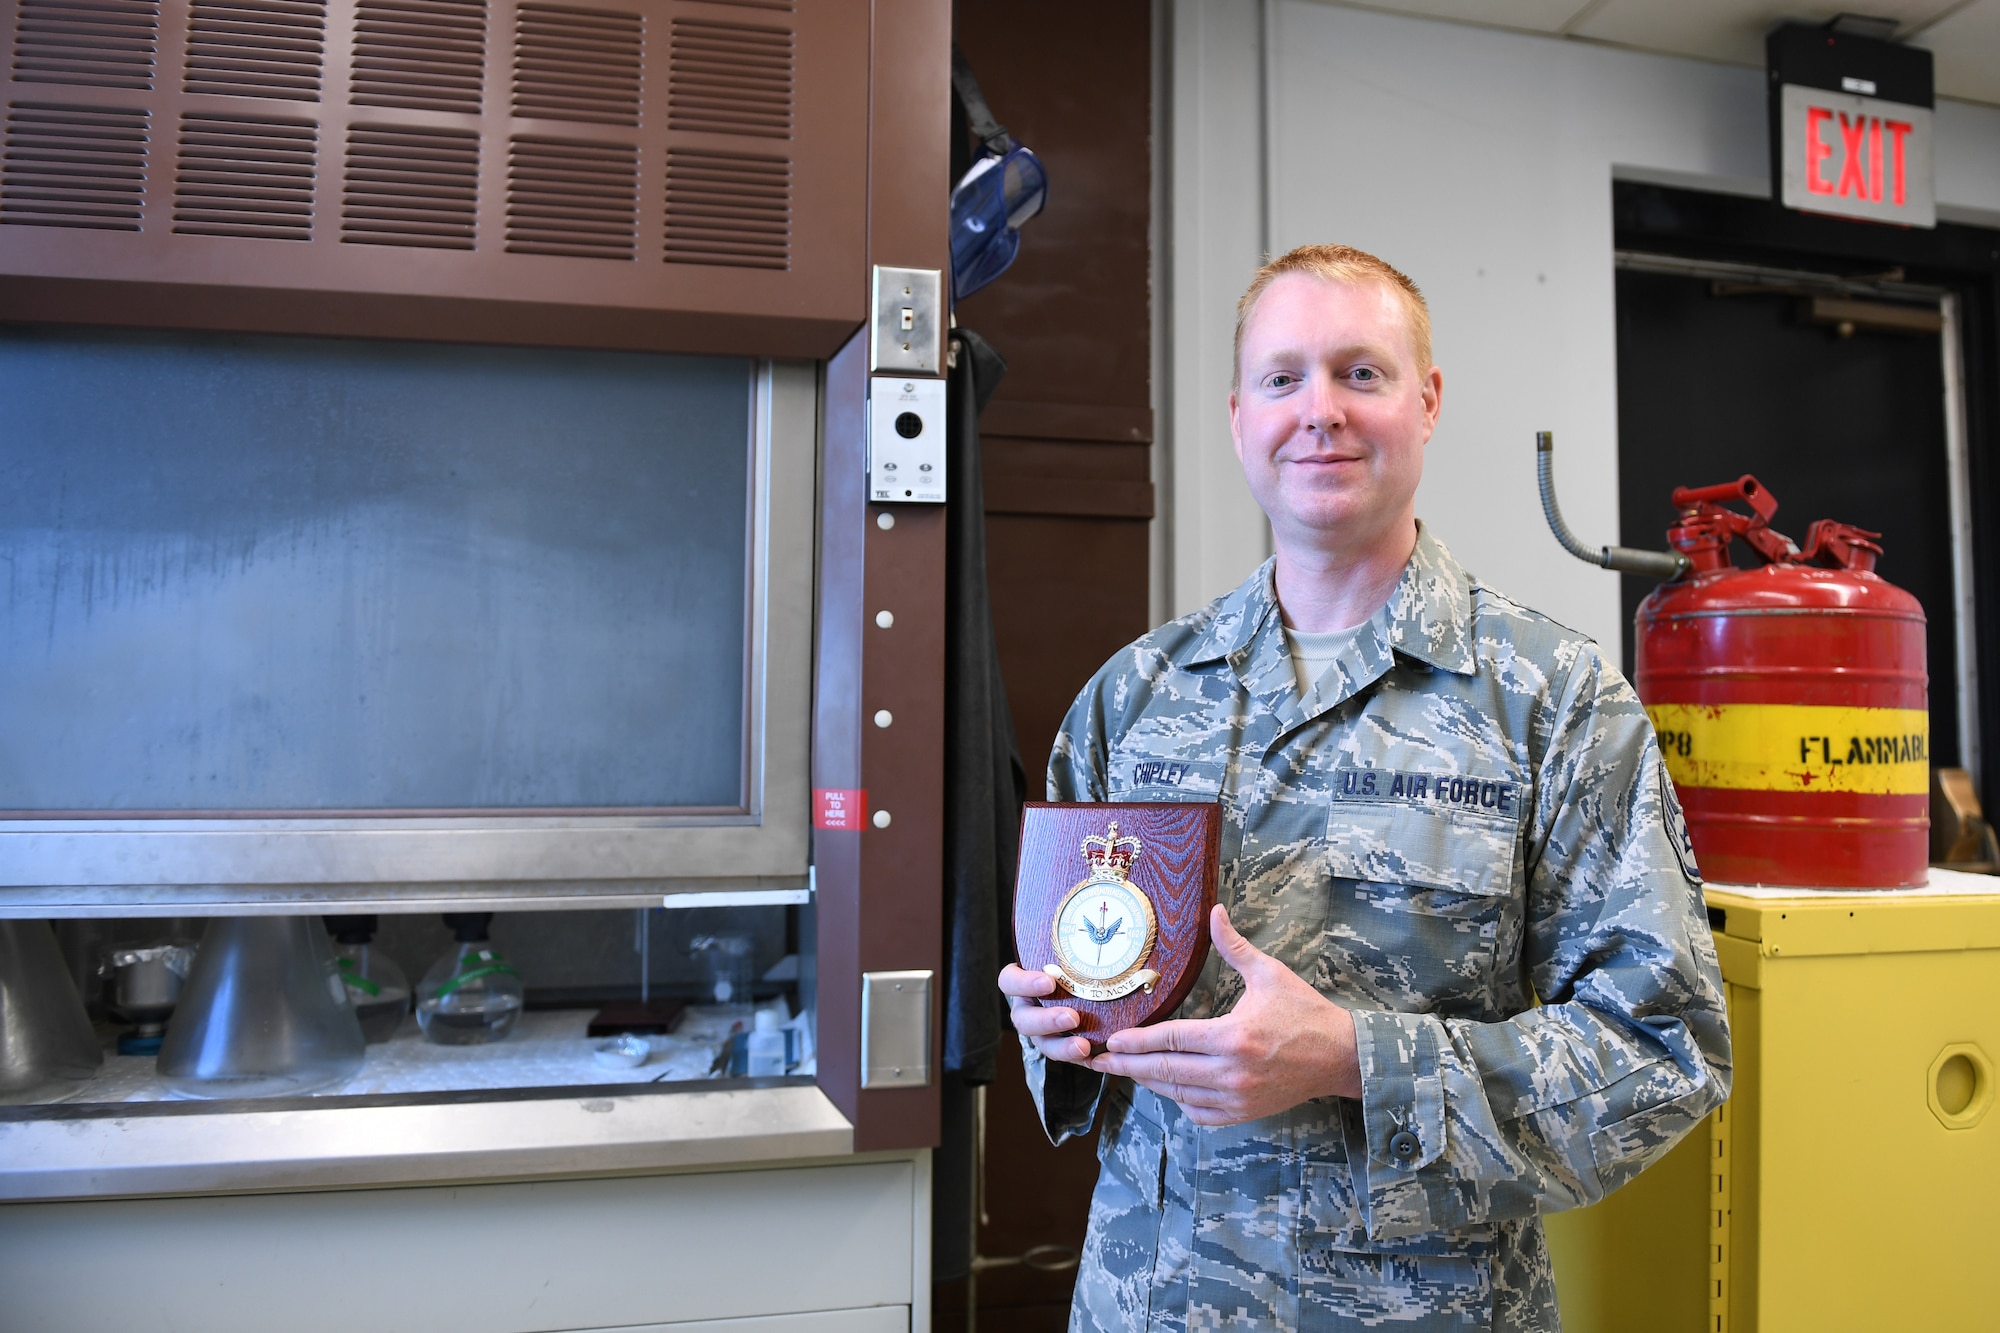 U.S. Air Force Staff Sgt. Jason Chipley, 145th Logistics Readiness Squadron, posed with a squadron plaque that he received from spending two weeks with the Royal Air Force in the United Kingdom as part of the Military Reserve Exchange Program at the North Carolina Air National Guard Base, Charlotte Douglas International Airport, August 5, 2018. During his trip, Chipley was embedded with members of the 4624 Squadron of the Royal Air Force where he presented briefings about the North Carolina Air National Guard and experienced their military culture.